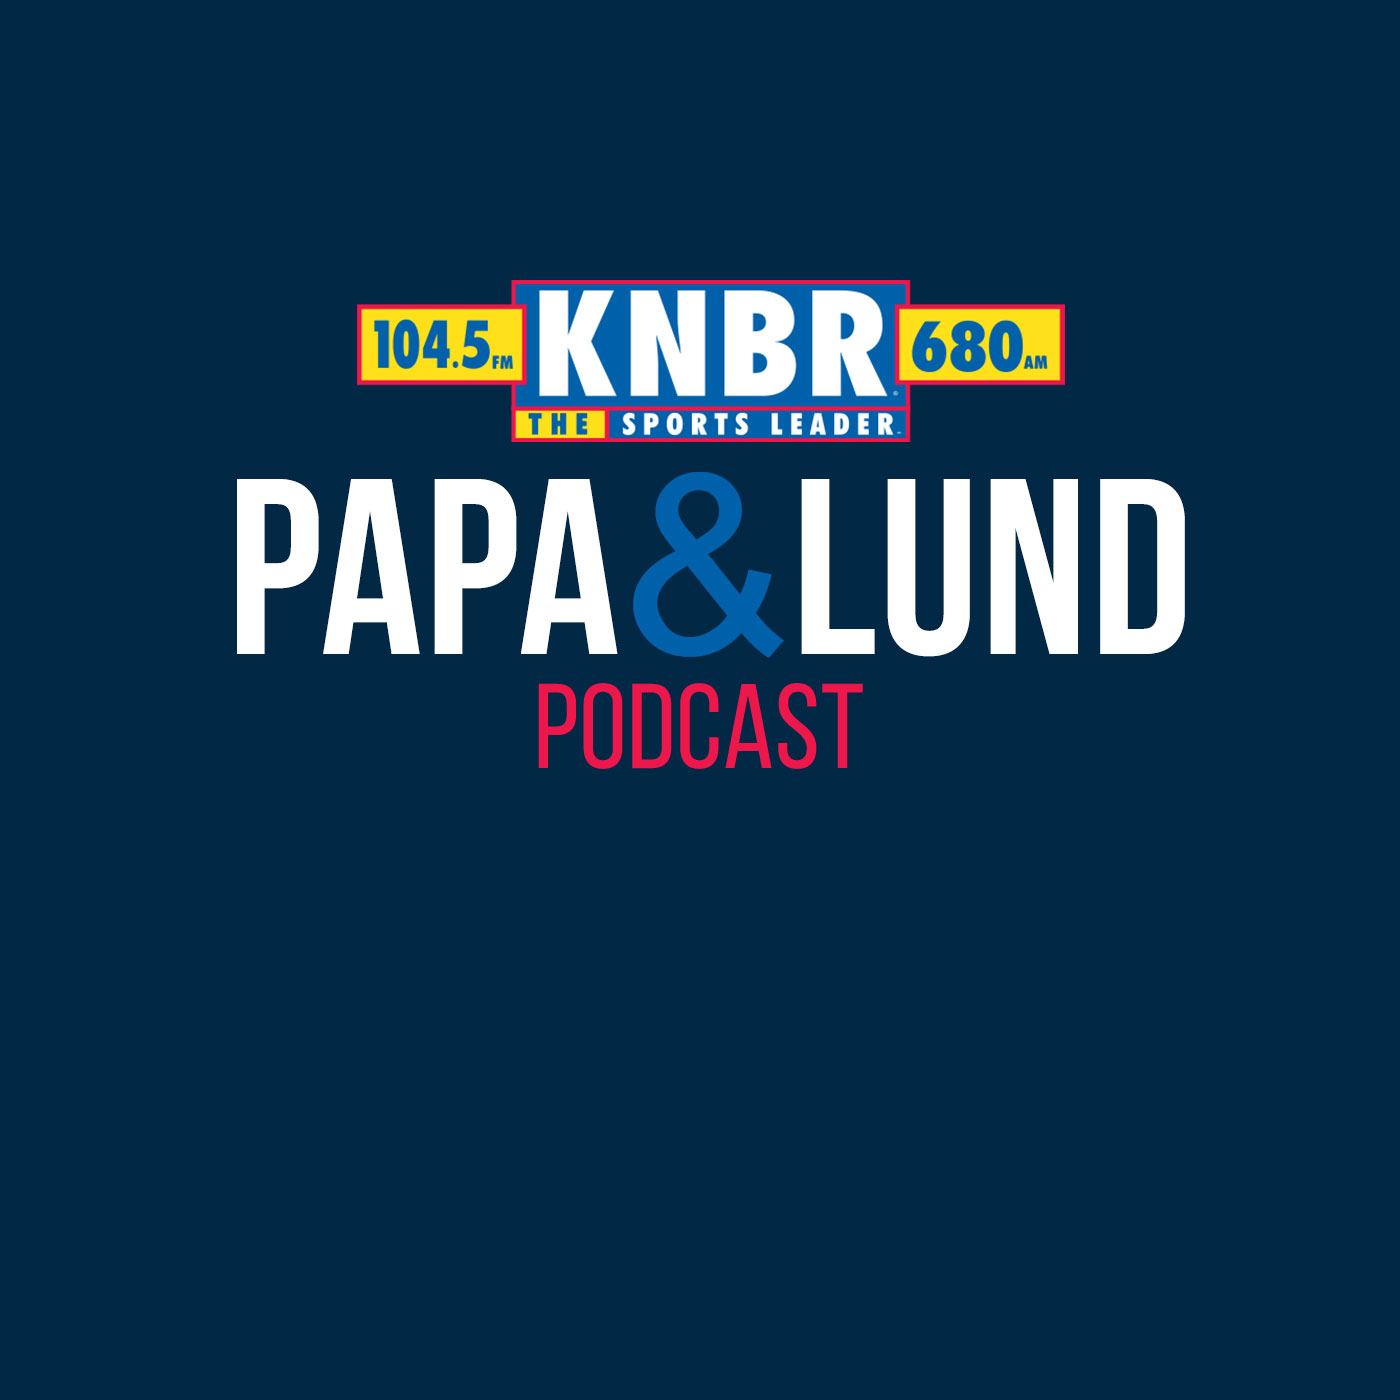 4-16 Papa & Lund Show - Hour 2 - Papa & Lund discuss how the Warriors experience is an advantage but isn't the only reason they can win + Interviews with Logan Webb & Marcus Thompson